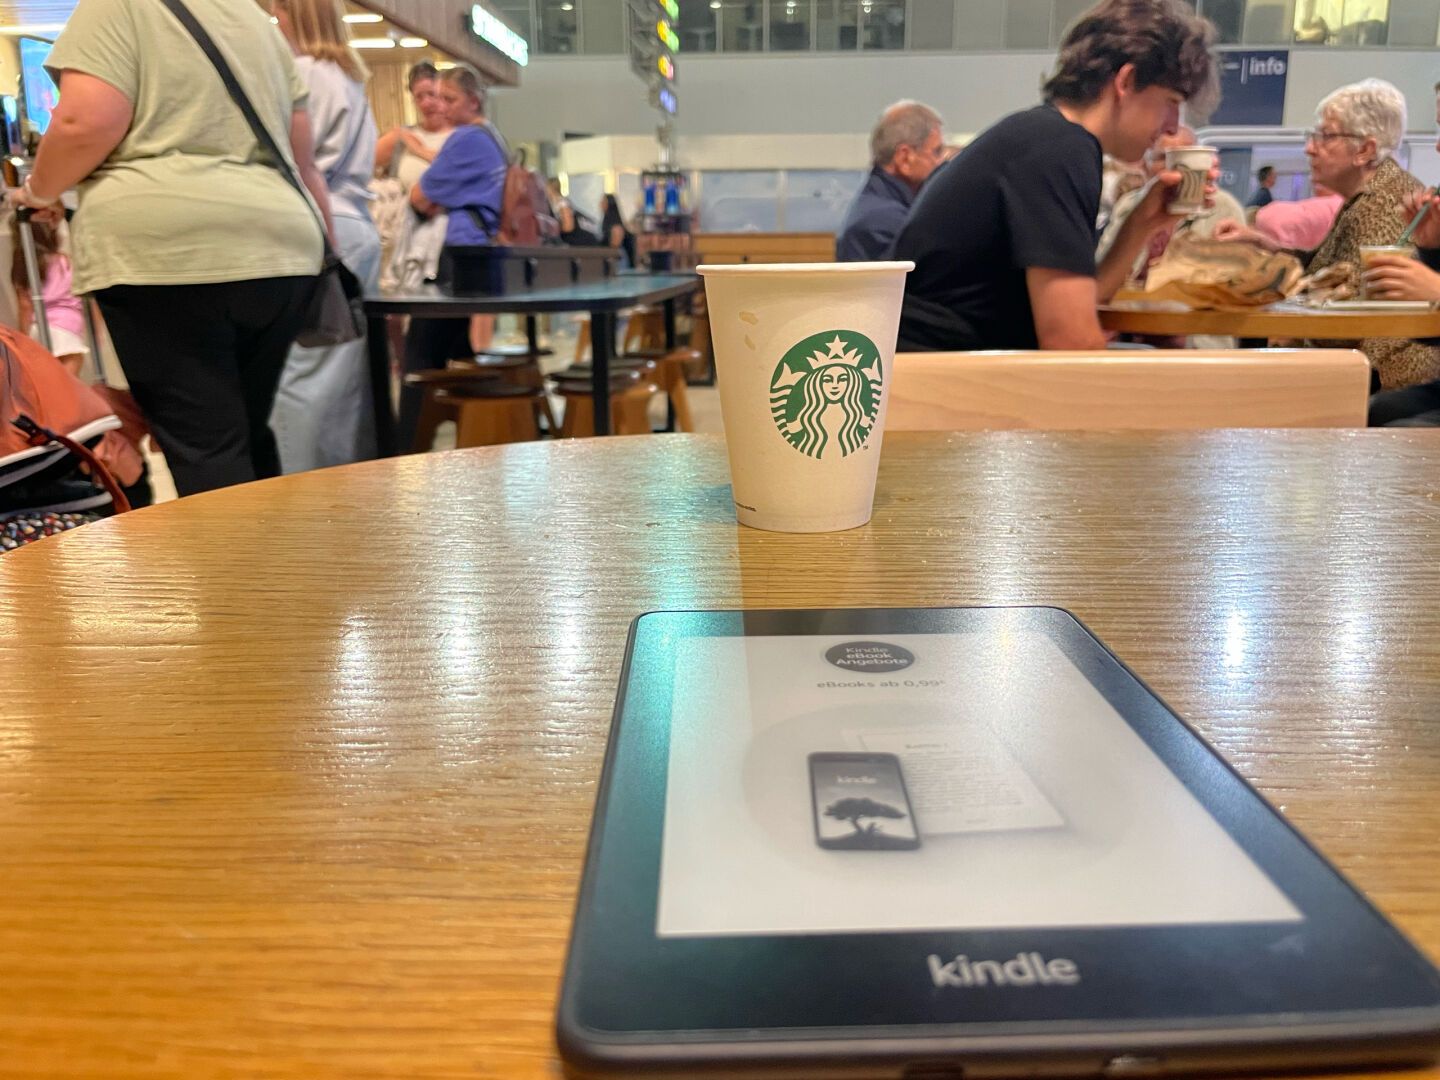 In the photo you can see a Starbucks coffee and a Kindle on a table, and some people in the background lining up to get their coffee. We are at the Alicante airport waiting to board our flight.